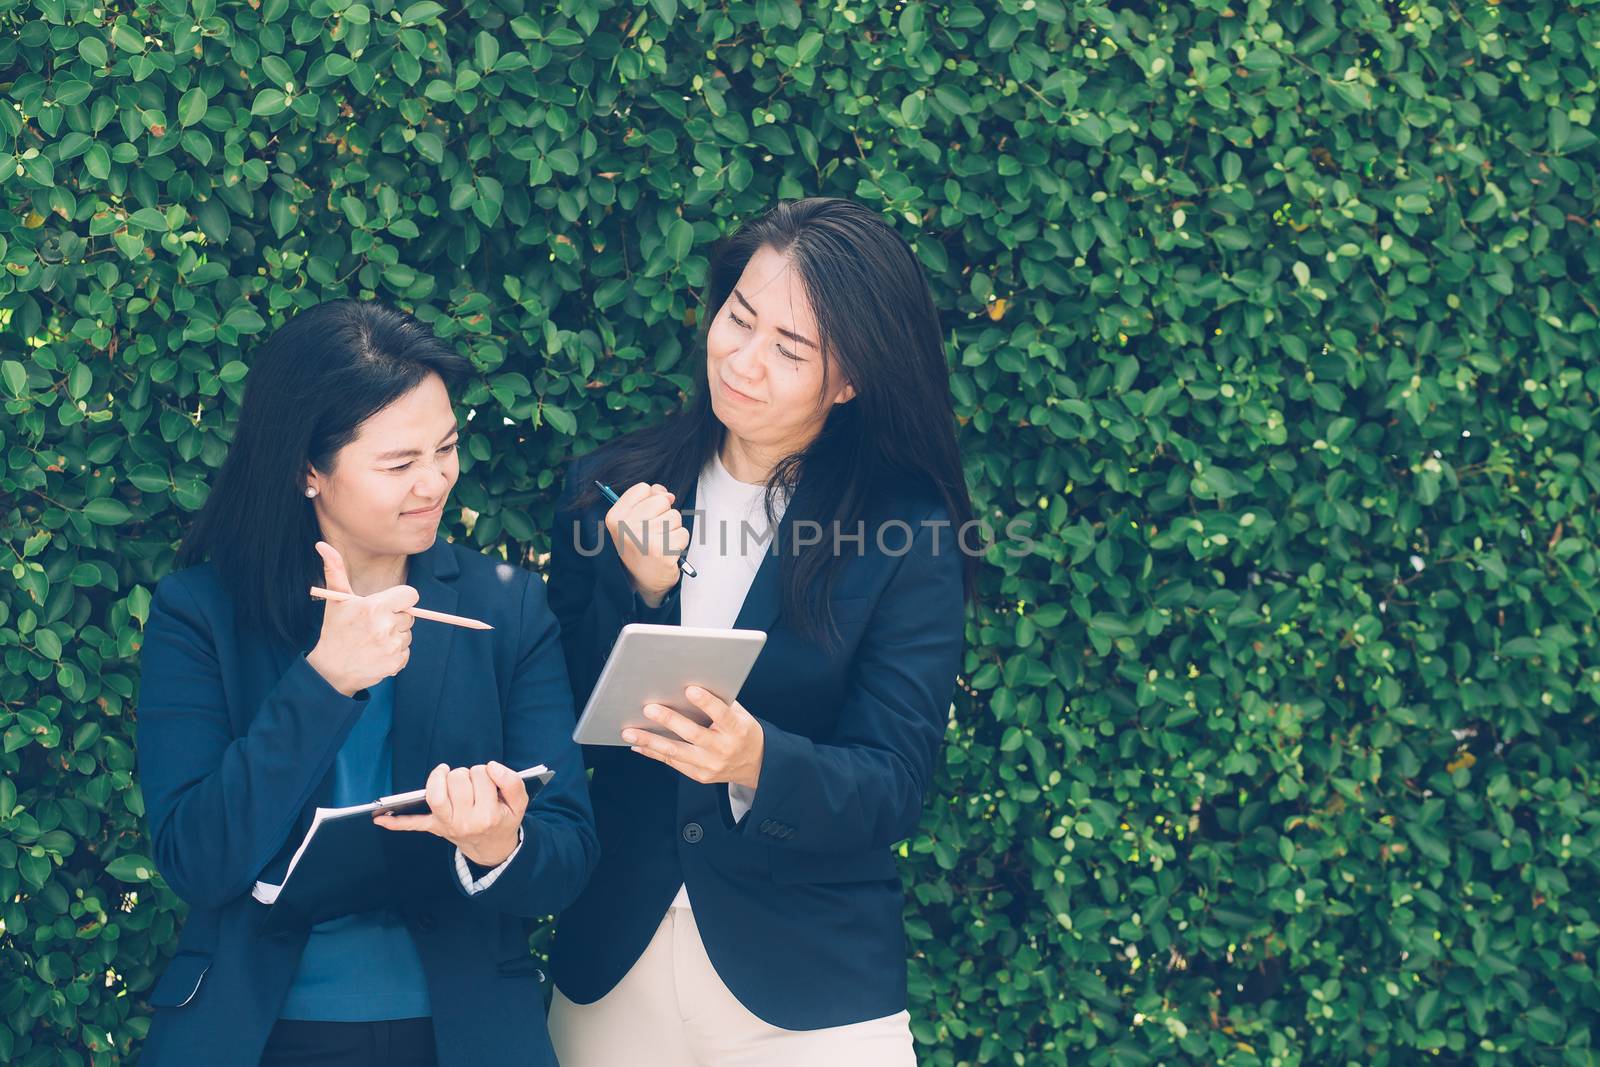 Two business people discussing information on a tablet-and taking notes as they work together as a team in the garden.